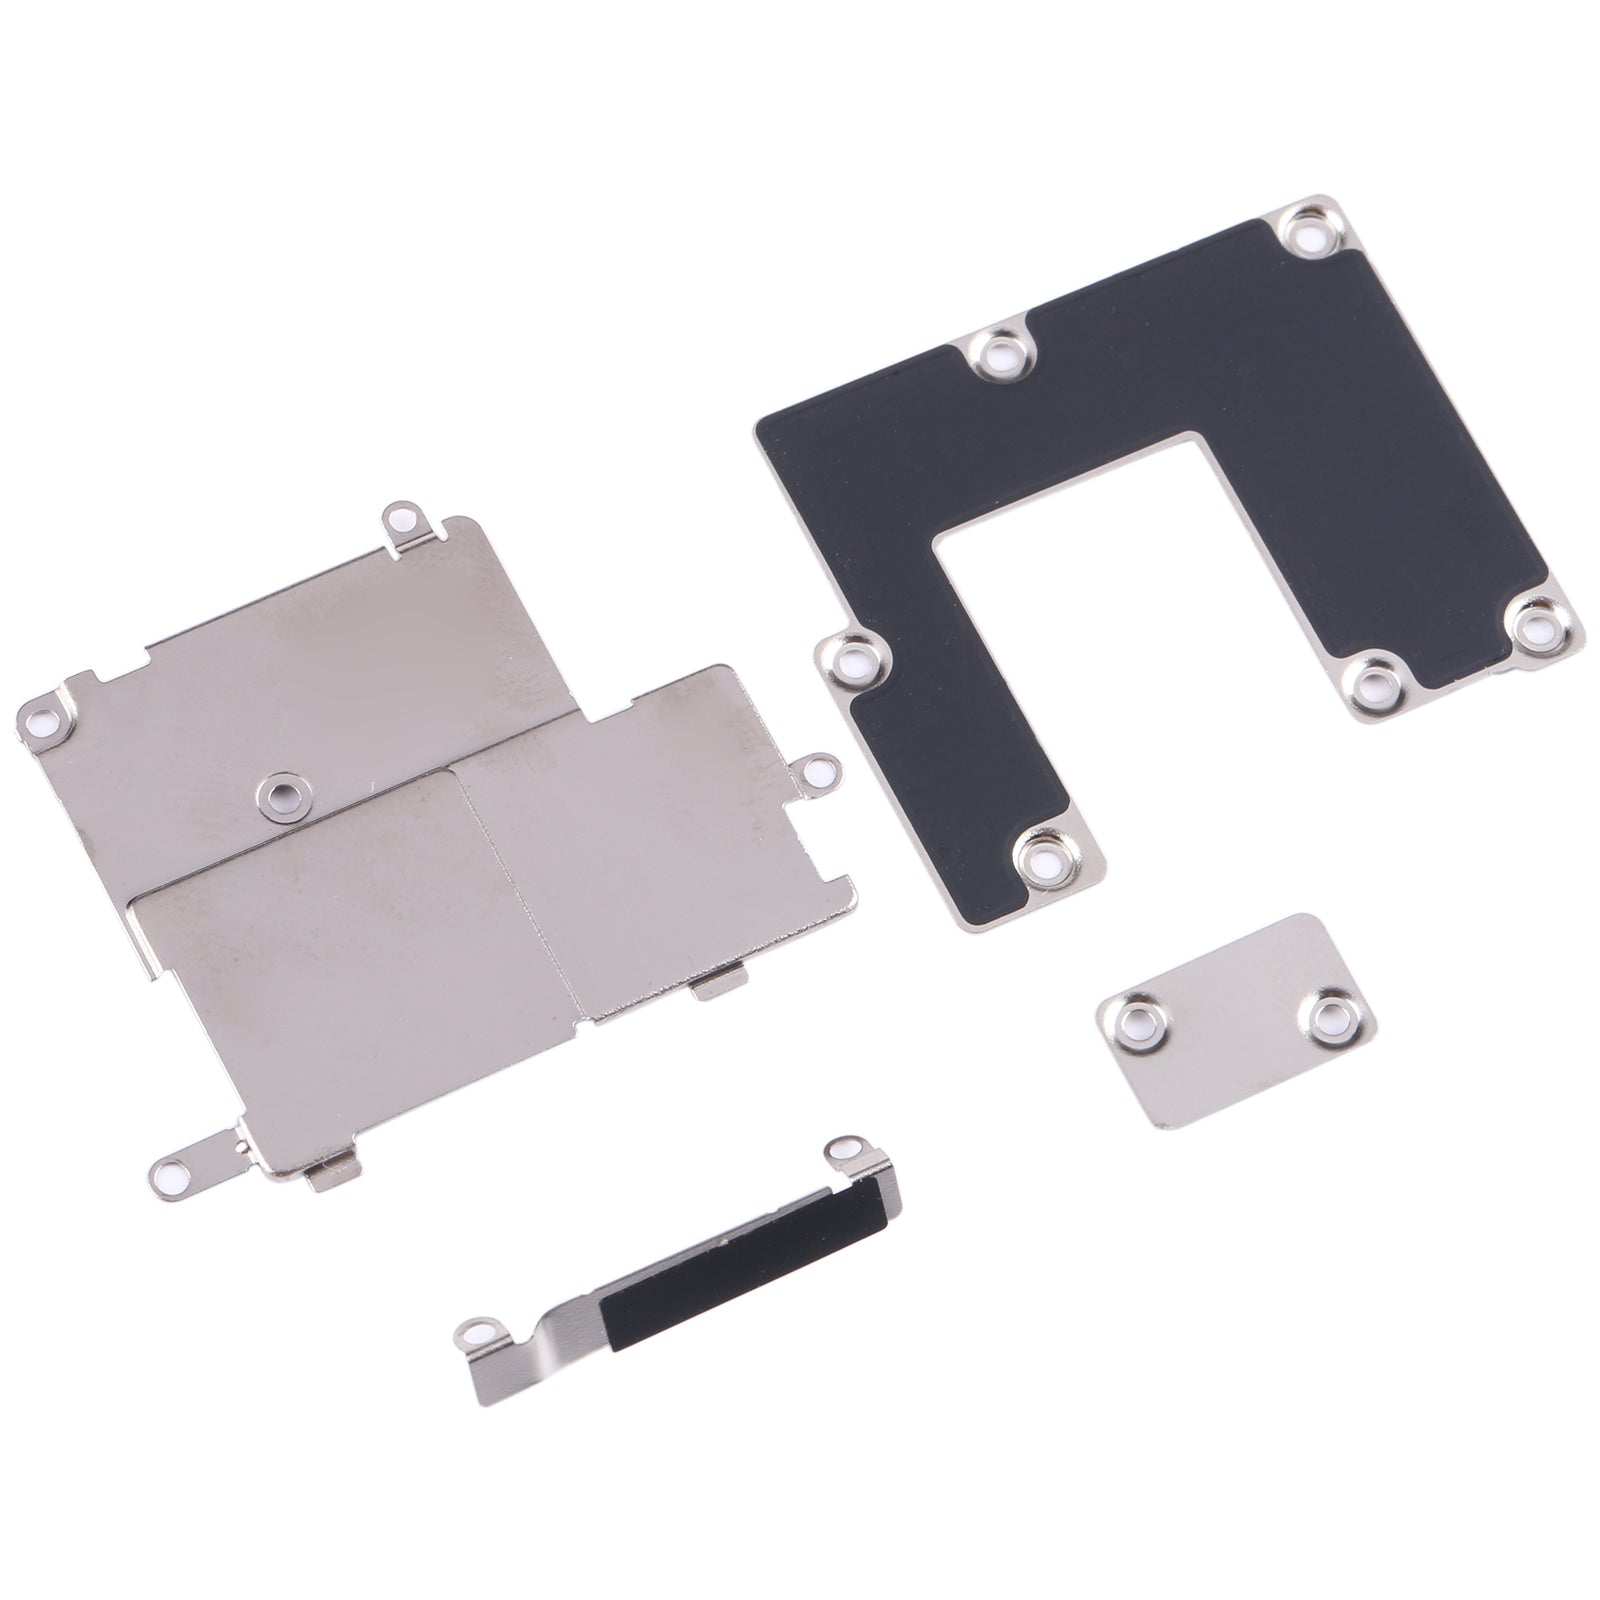 Pack of Internal Metal Parts iPhone 11 Pro